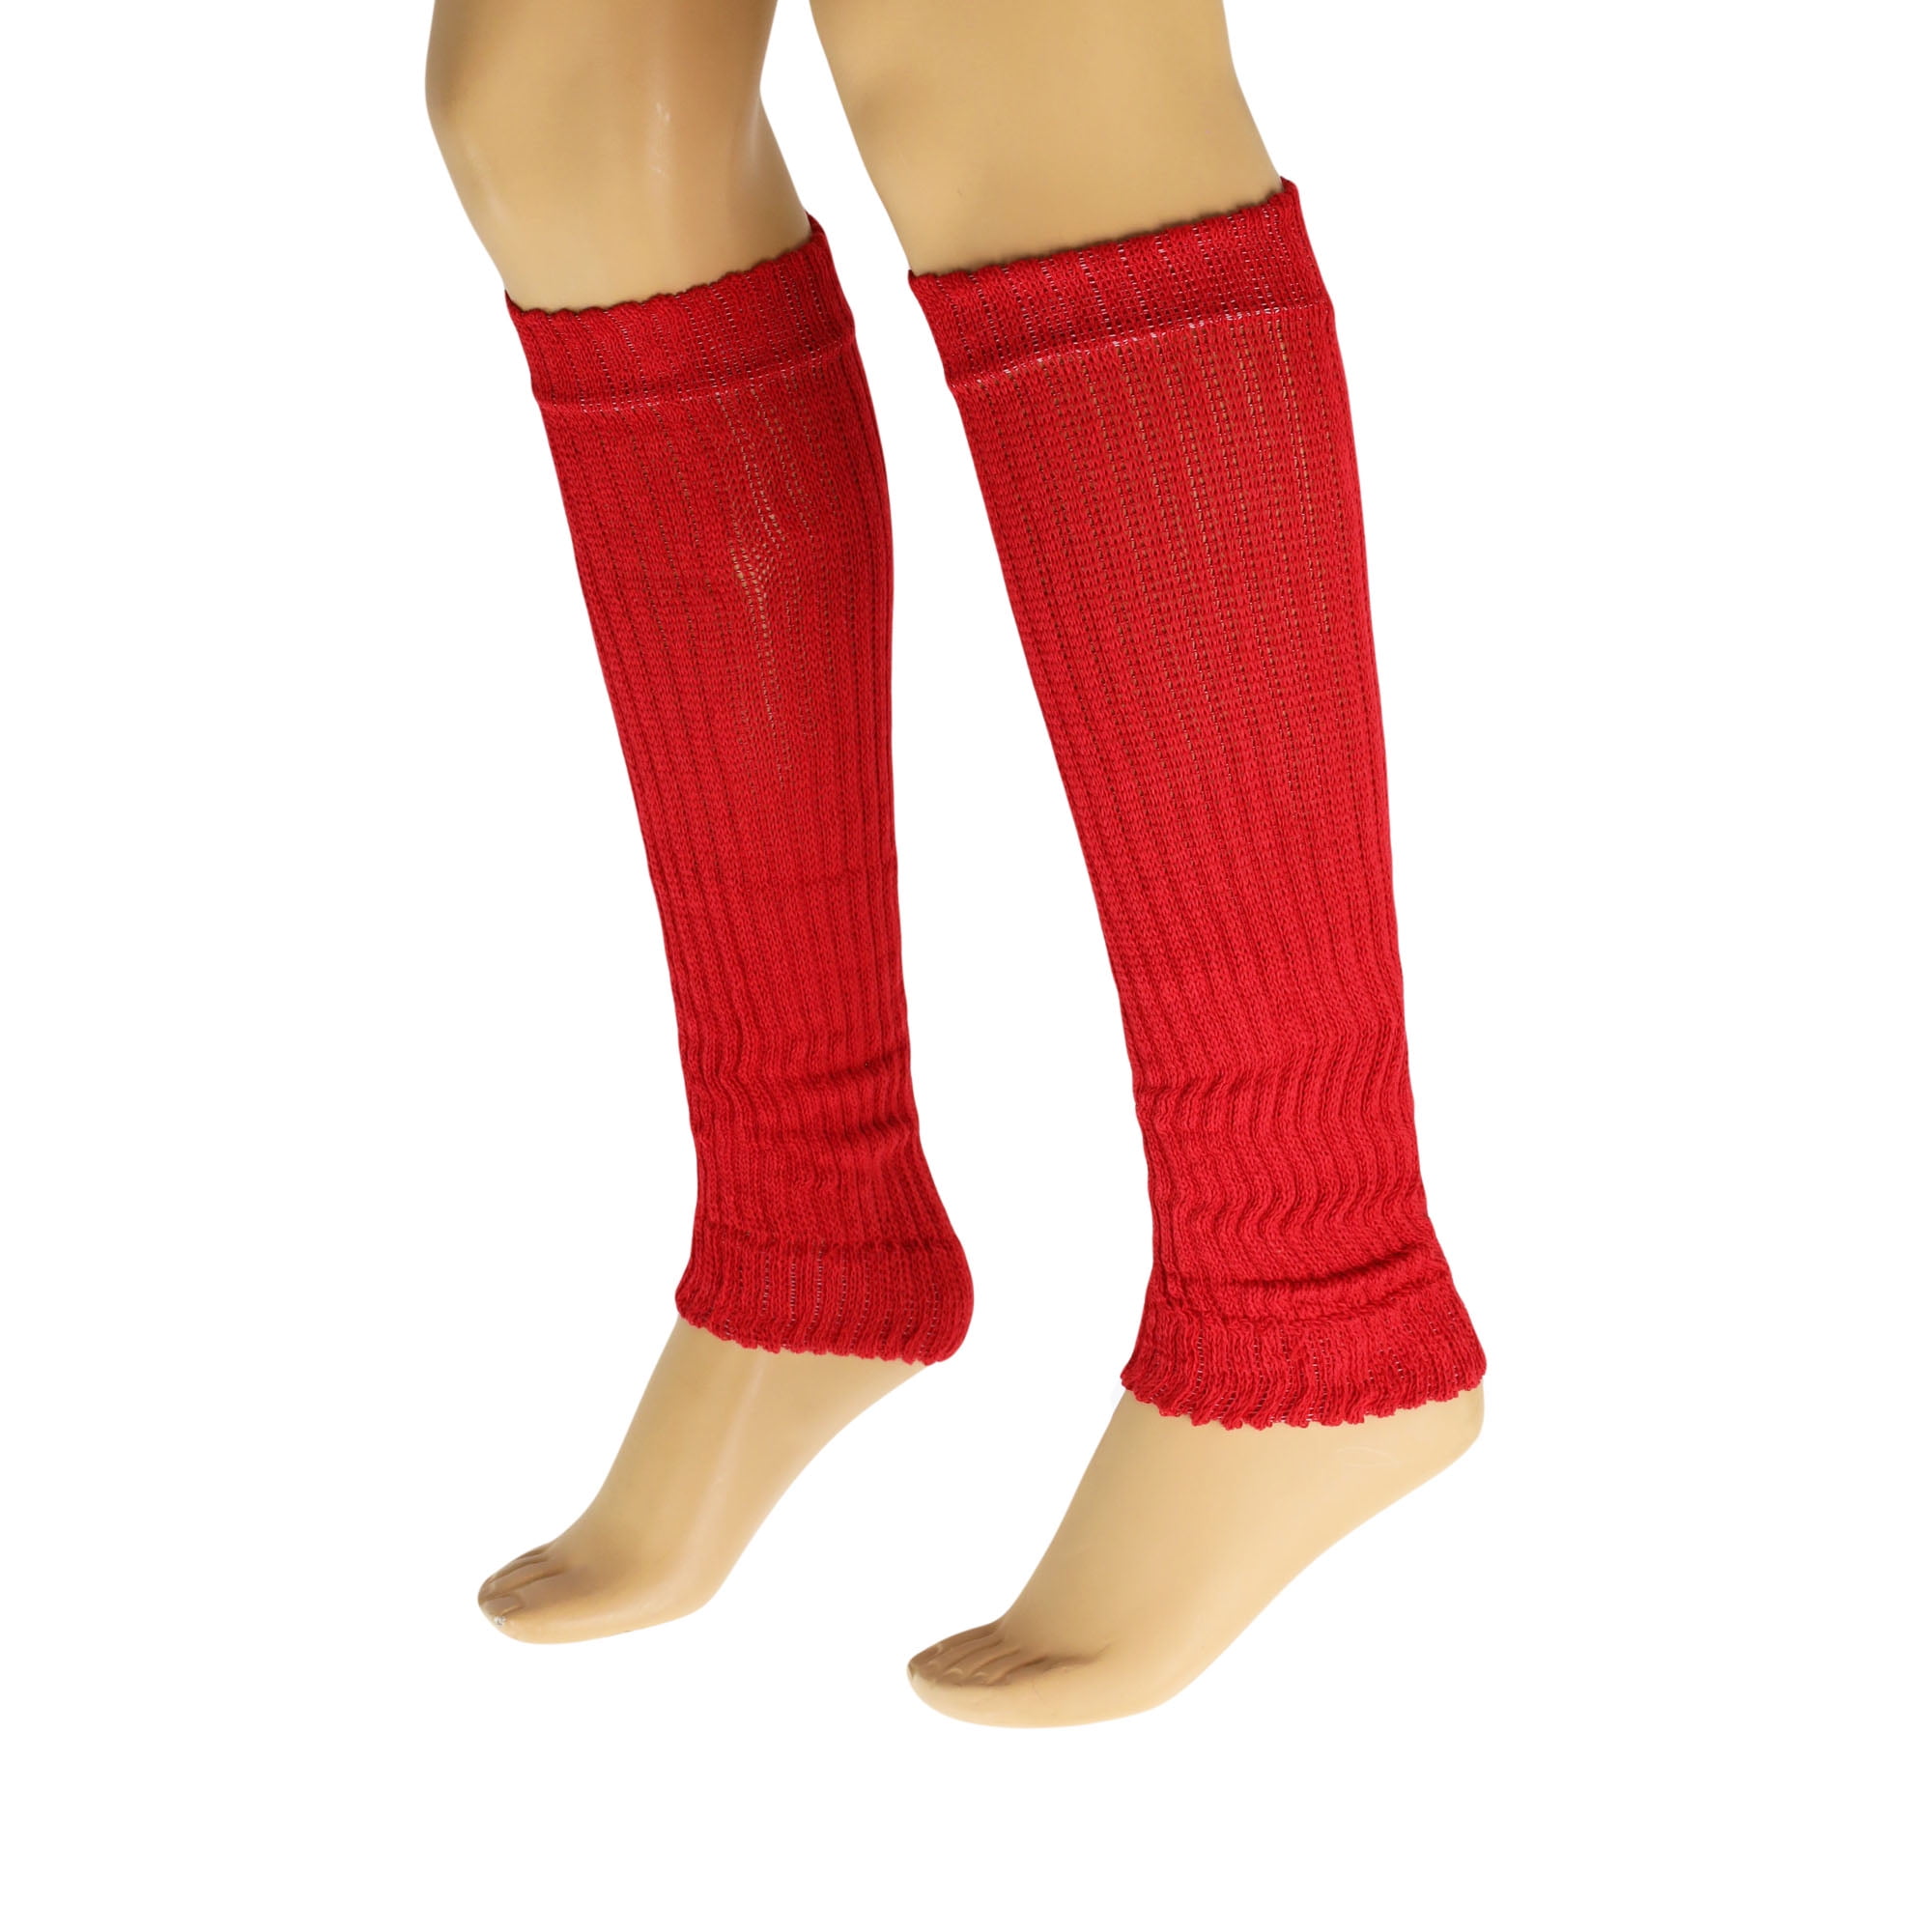 Cotton Leg Warmers for Women Red 1 Pair Knitted Retro - Walmart